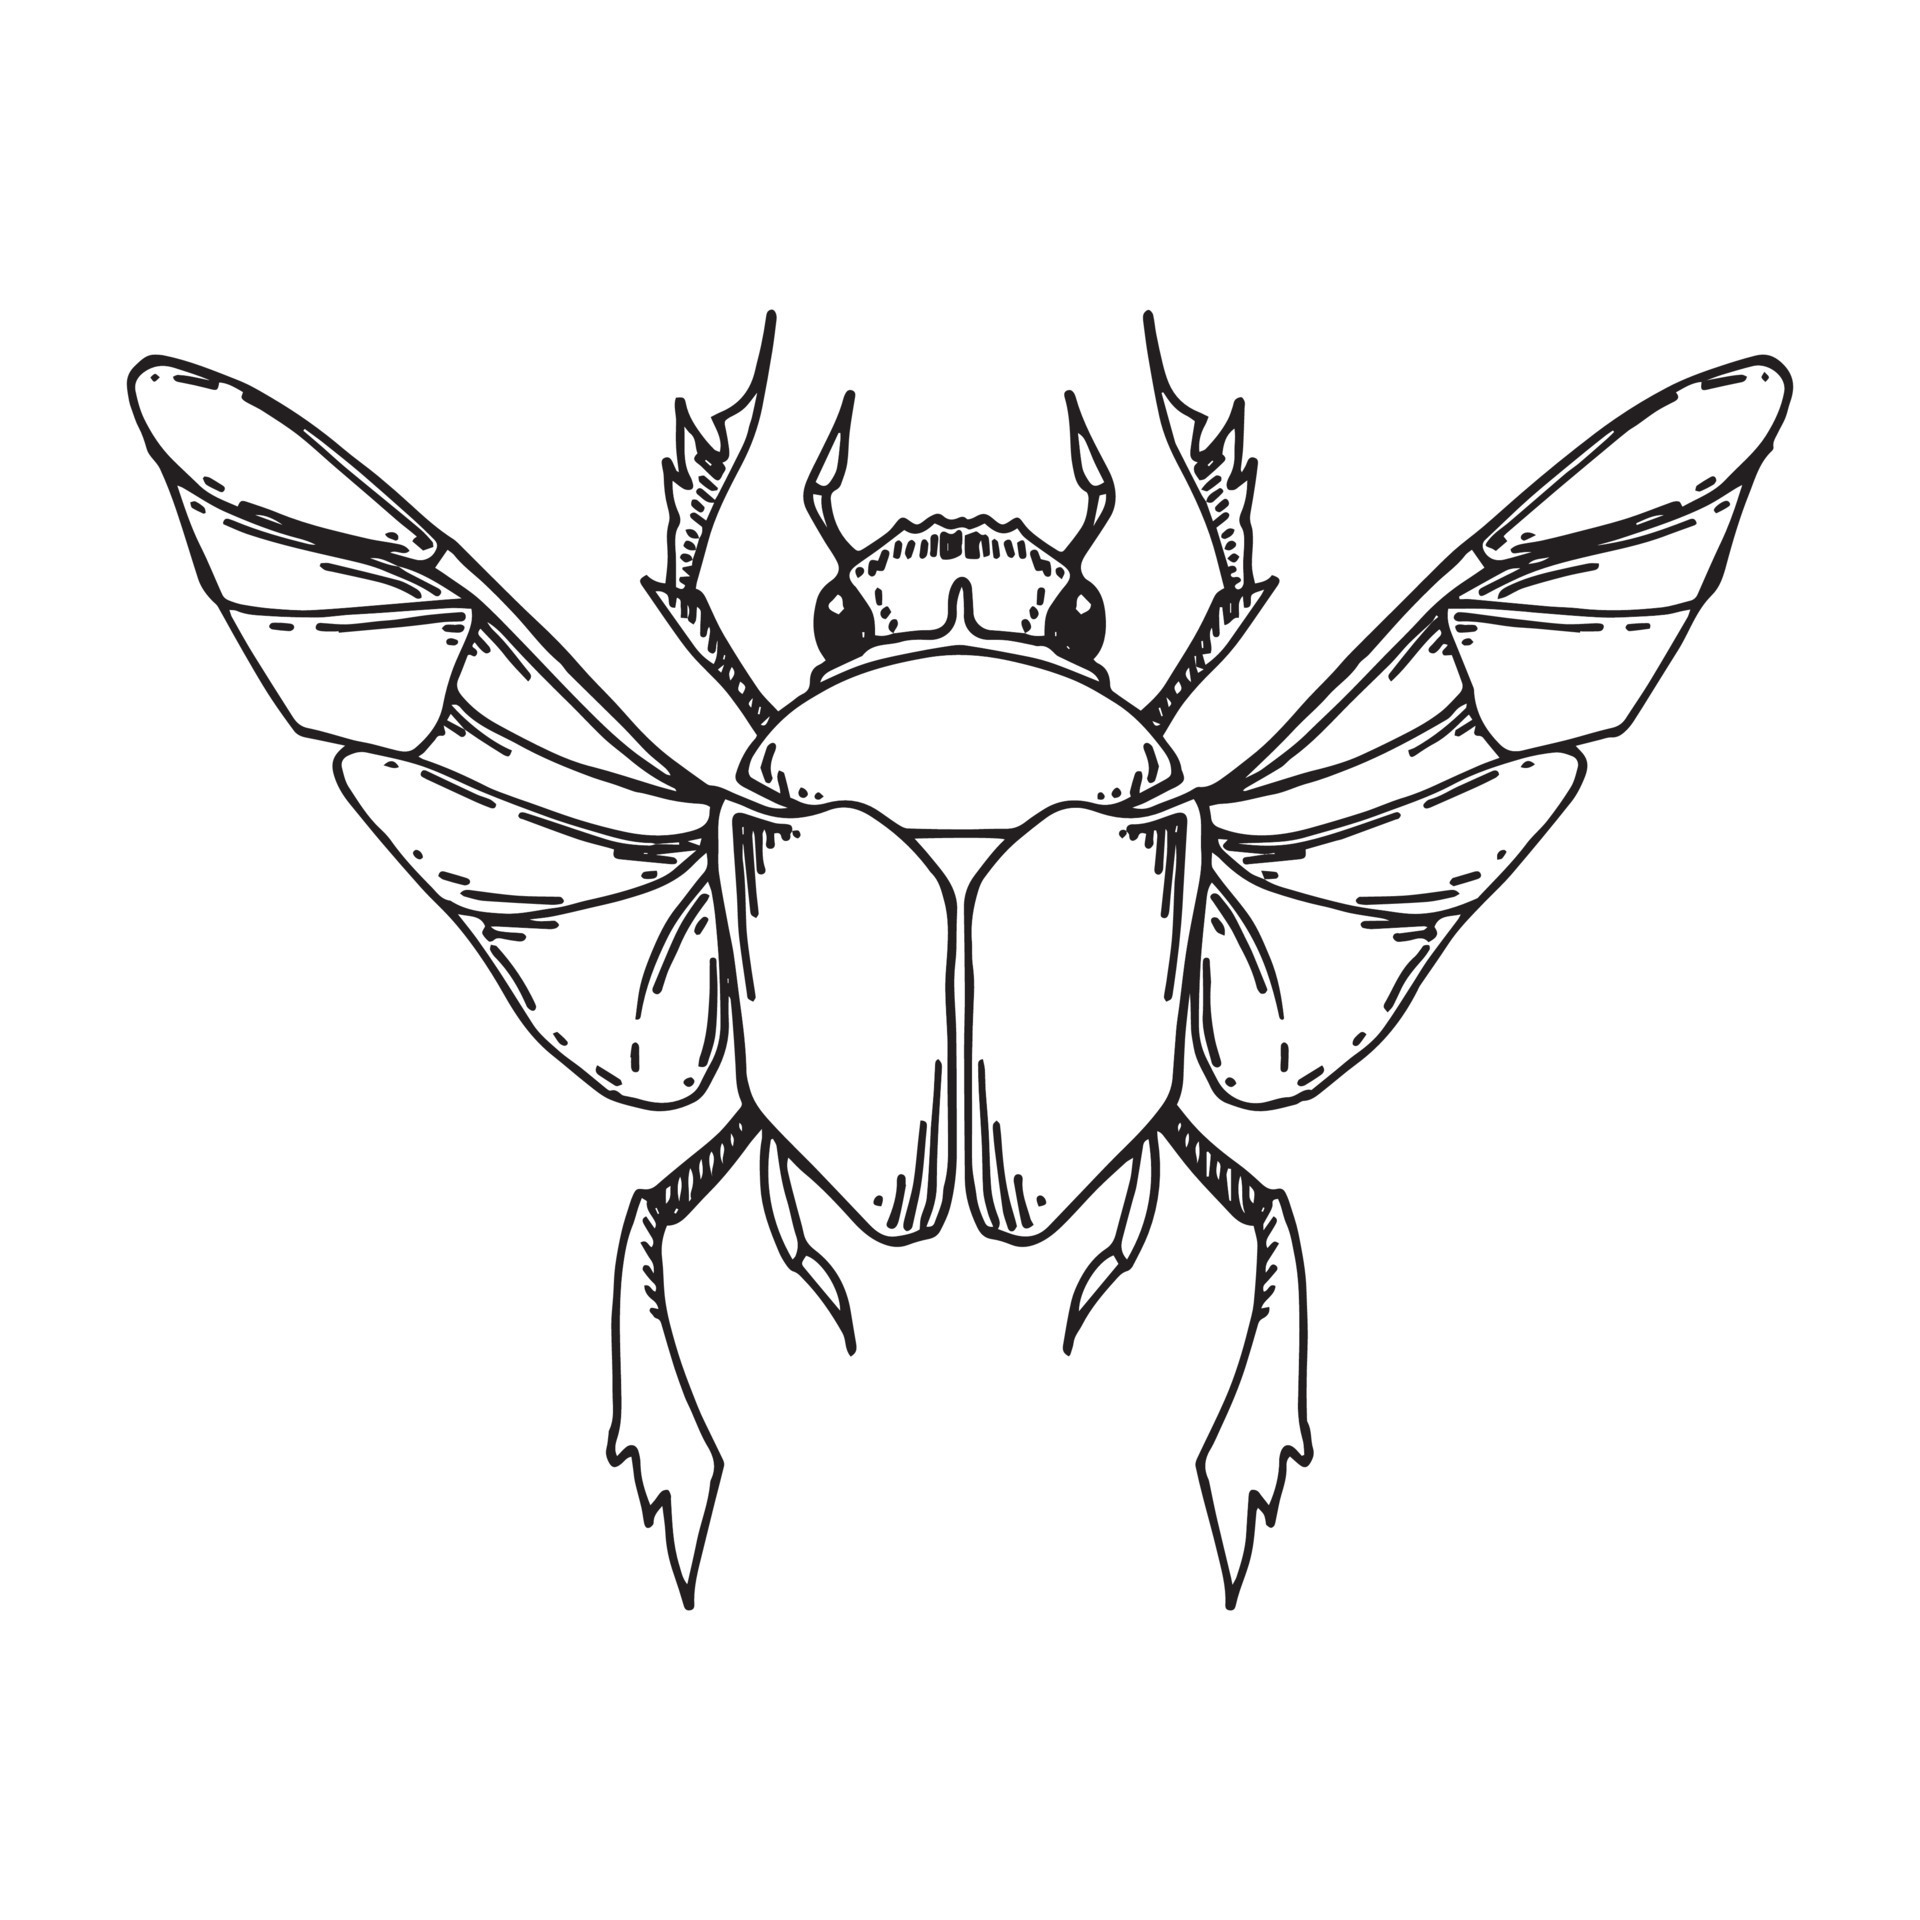 Made a bugs with wings flash sheet today : TattooDesigns | Insect art, Art  reference, Art inspo